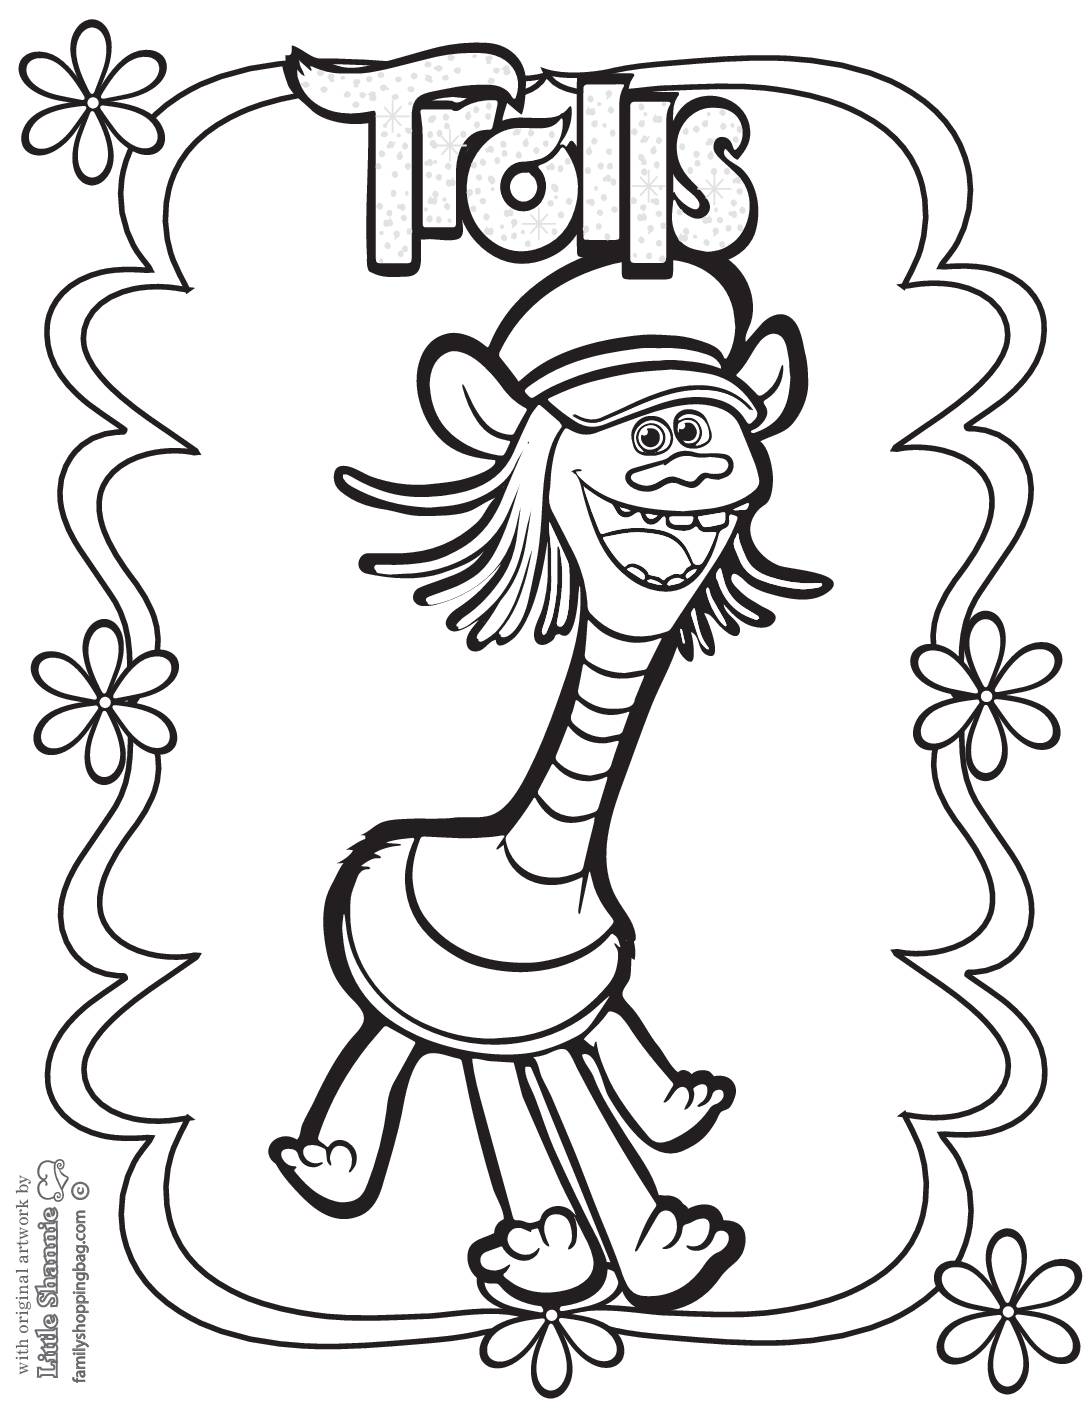 Coloring Page 6 Trolls